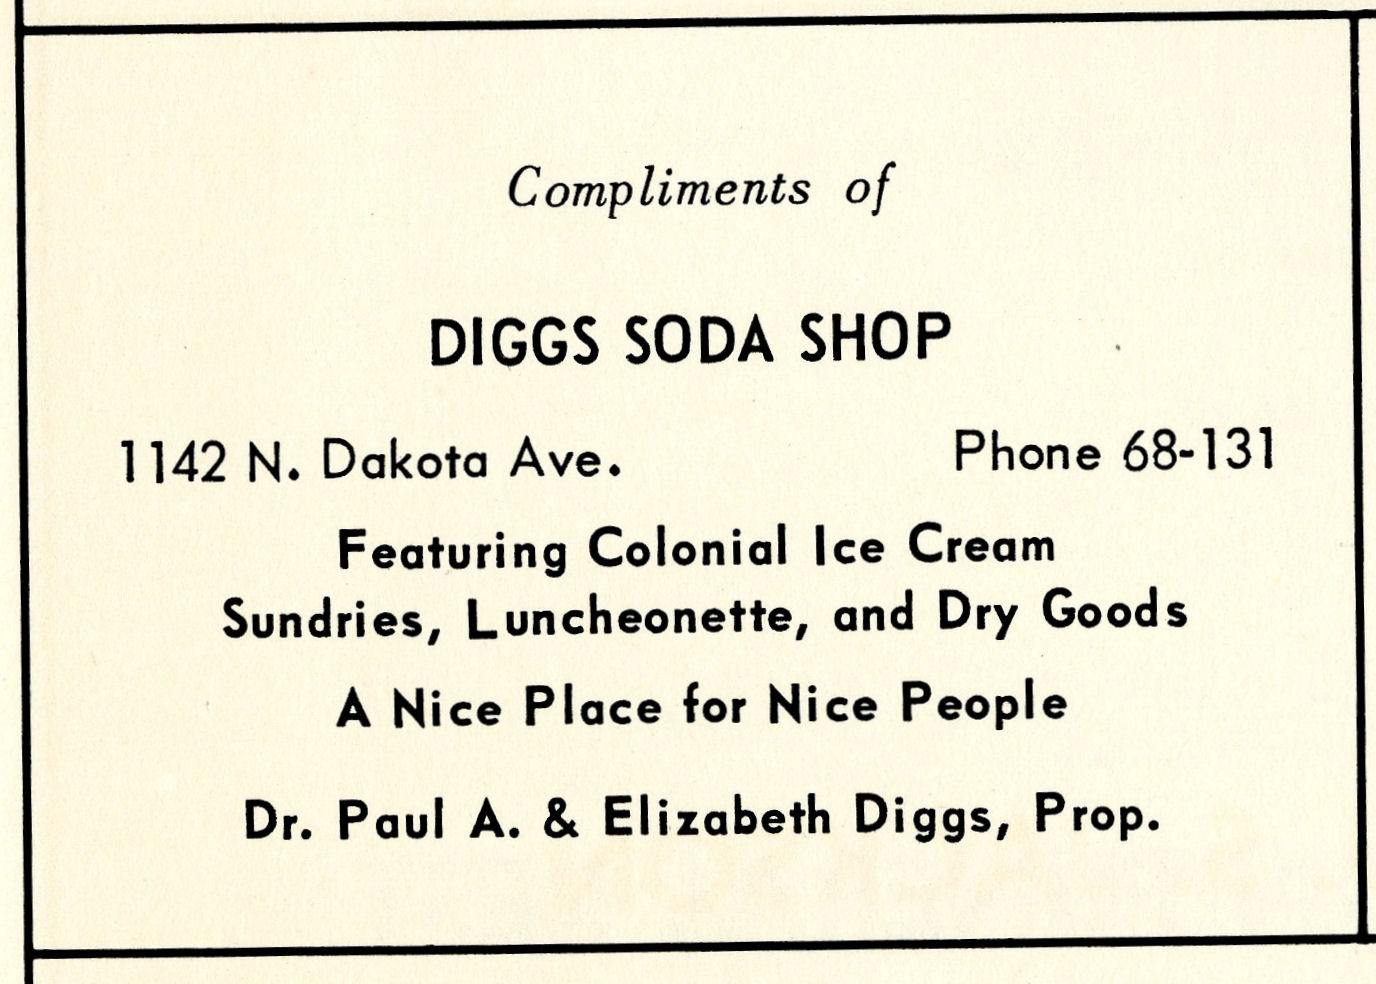 Paul A. Diggs and his wife Elizabeth operated Diggs Soda Shop inside Clark's Pharmacy on North Dakota Avenue (later renamed Martin Luther King Jr. Blvd). The building no longer exists. The land where it stood is now part of Jackson Park.